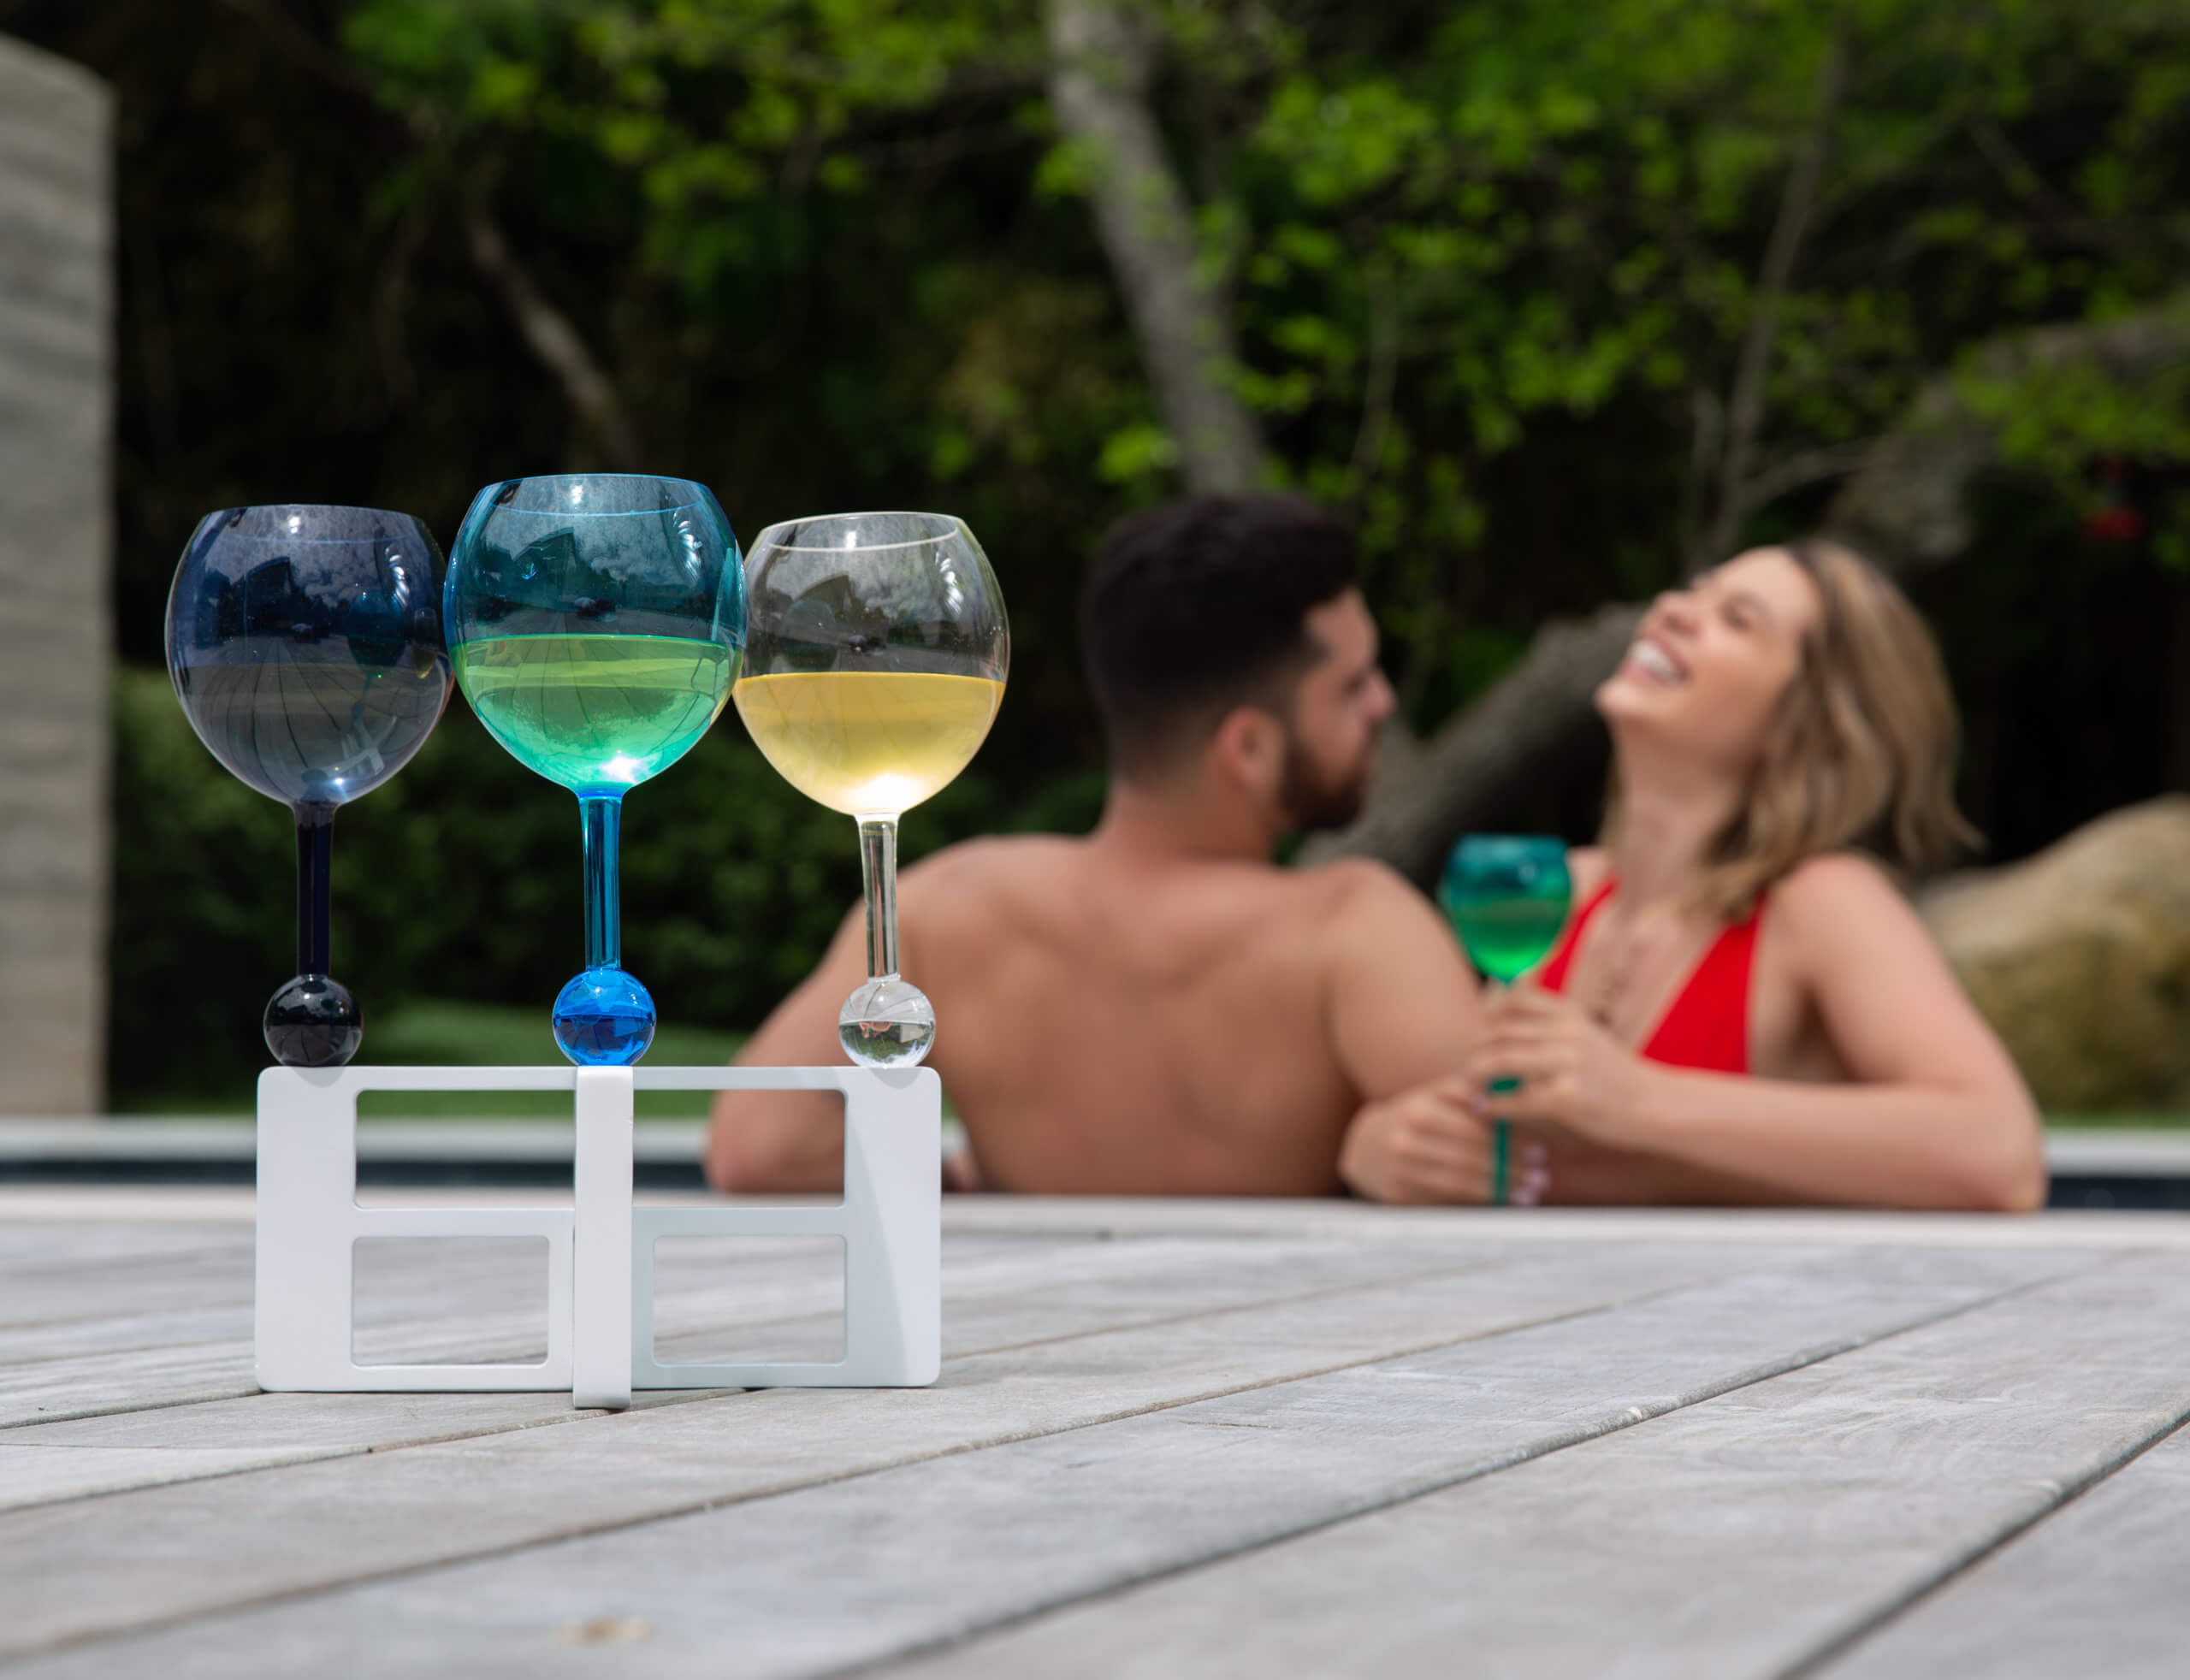 This floating wine glass will help you rosé all day through the summer